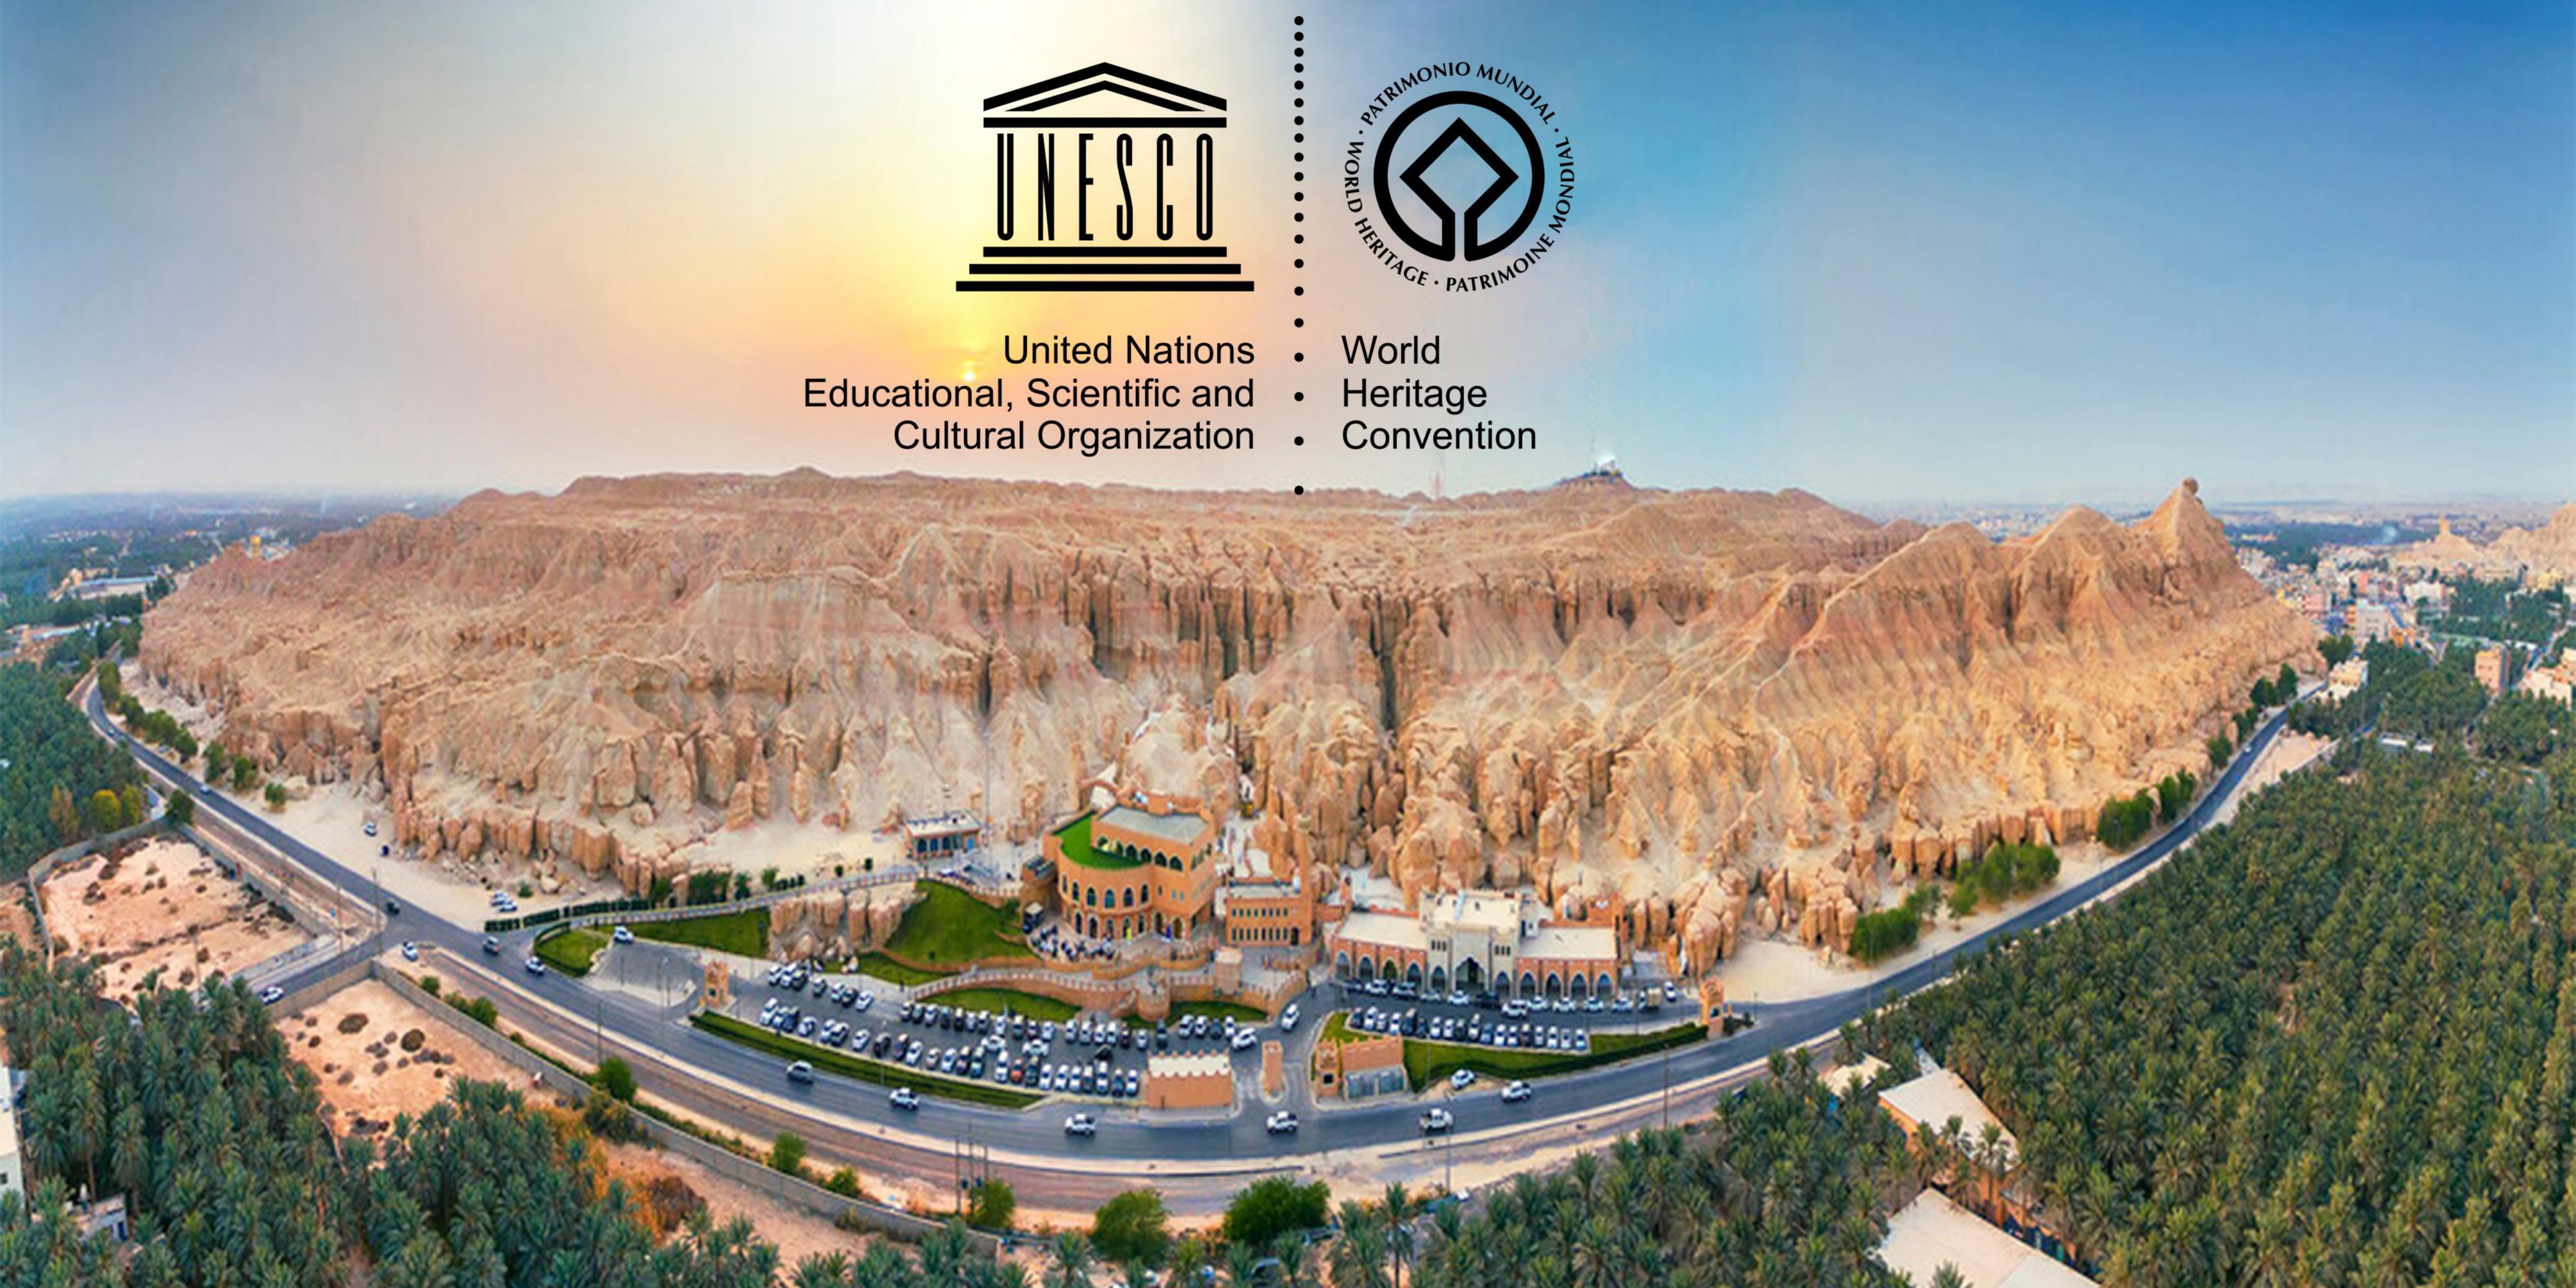 Explore Al Ahsa, a UNESCO World Heritage Site and a destination of spectacular landscapes of gardens, canal springs, wells, and drainage lakes. With historical wonders close to the hotel and plenty of sightseeing activities, enjoy the convenience of our designed package tours and city excursions.